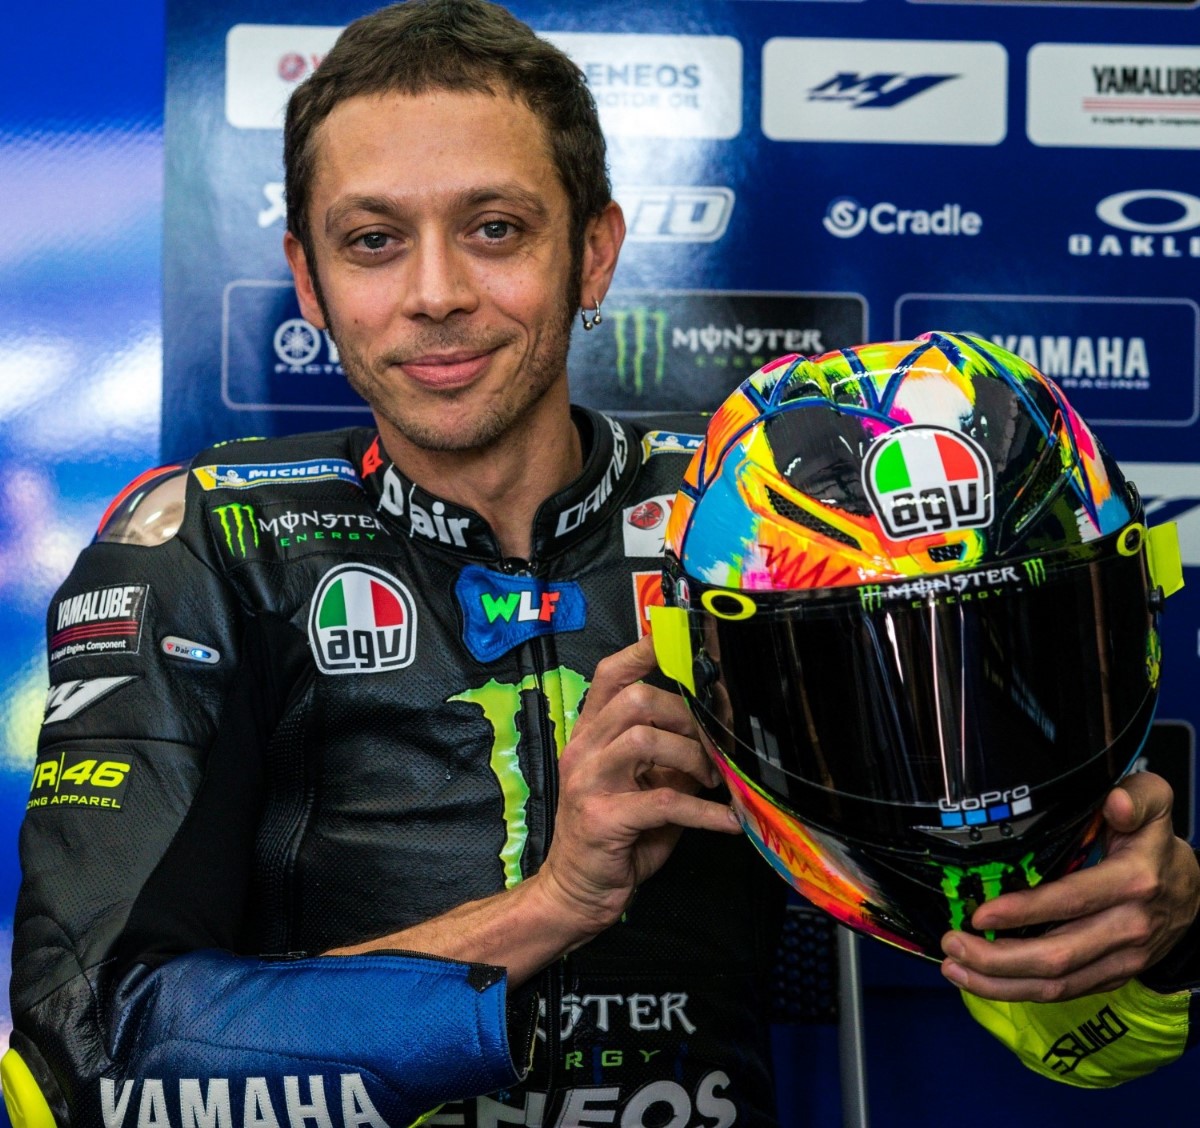 With age catching up to Rossi, it's time